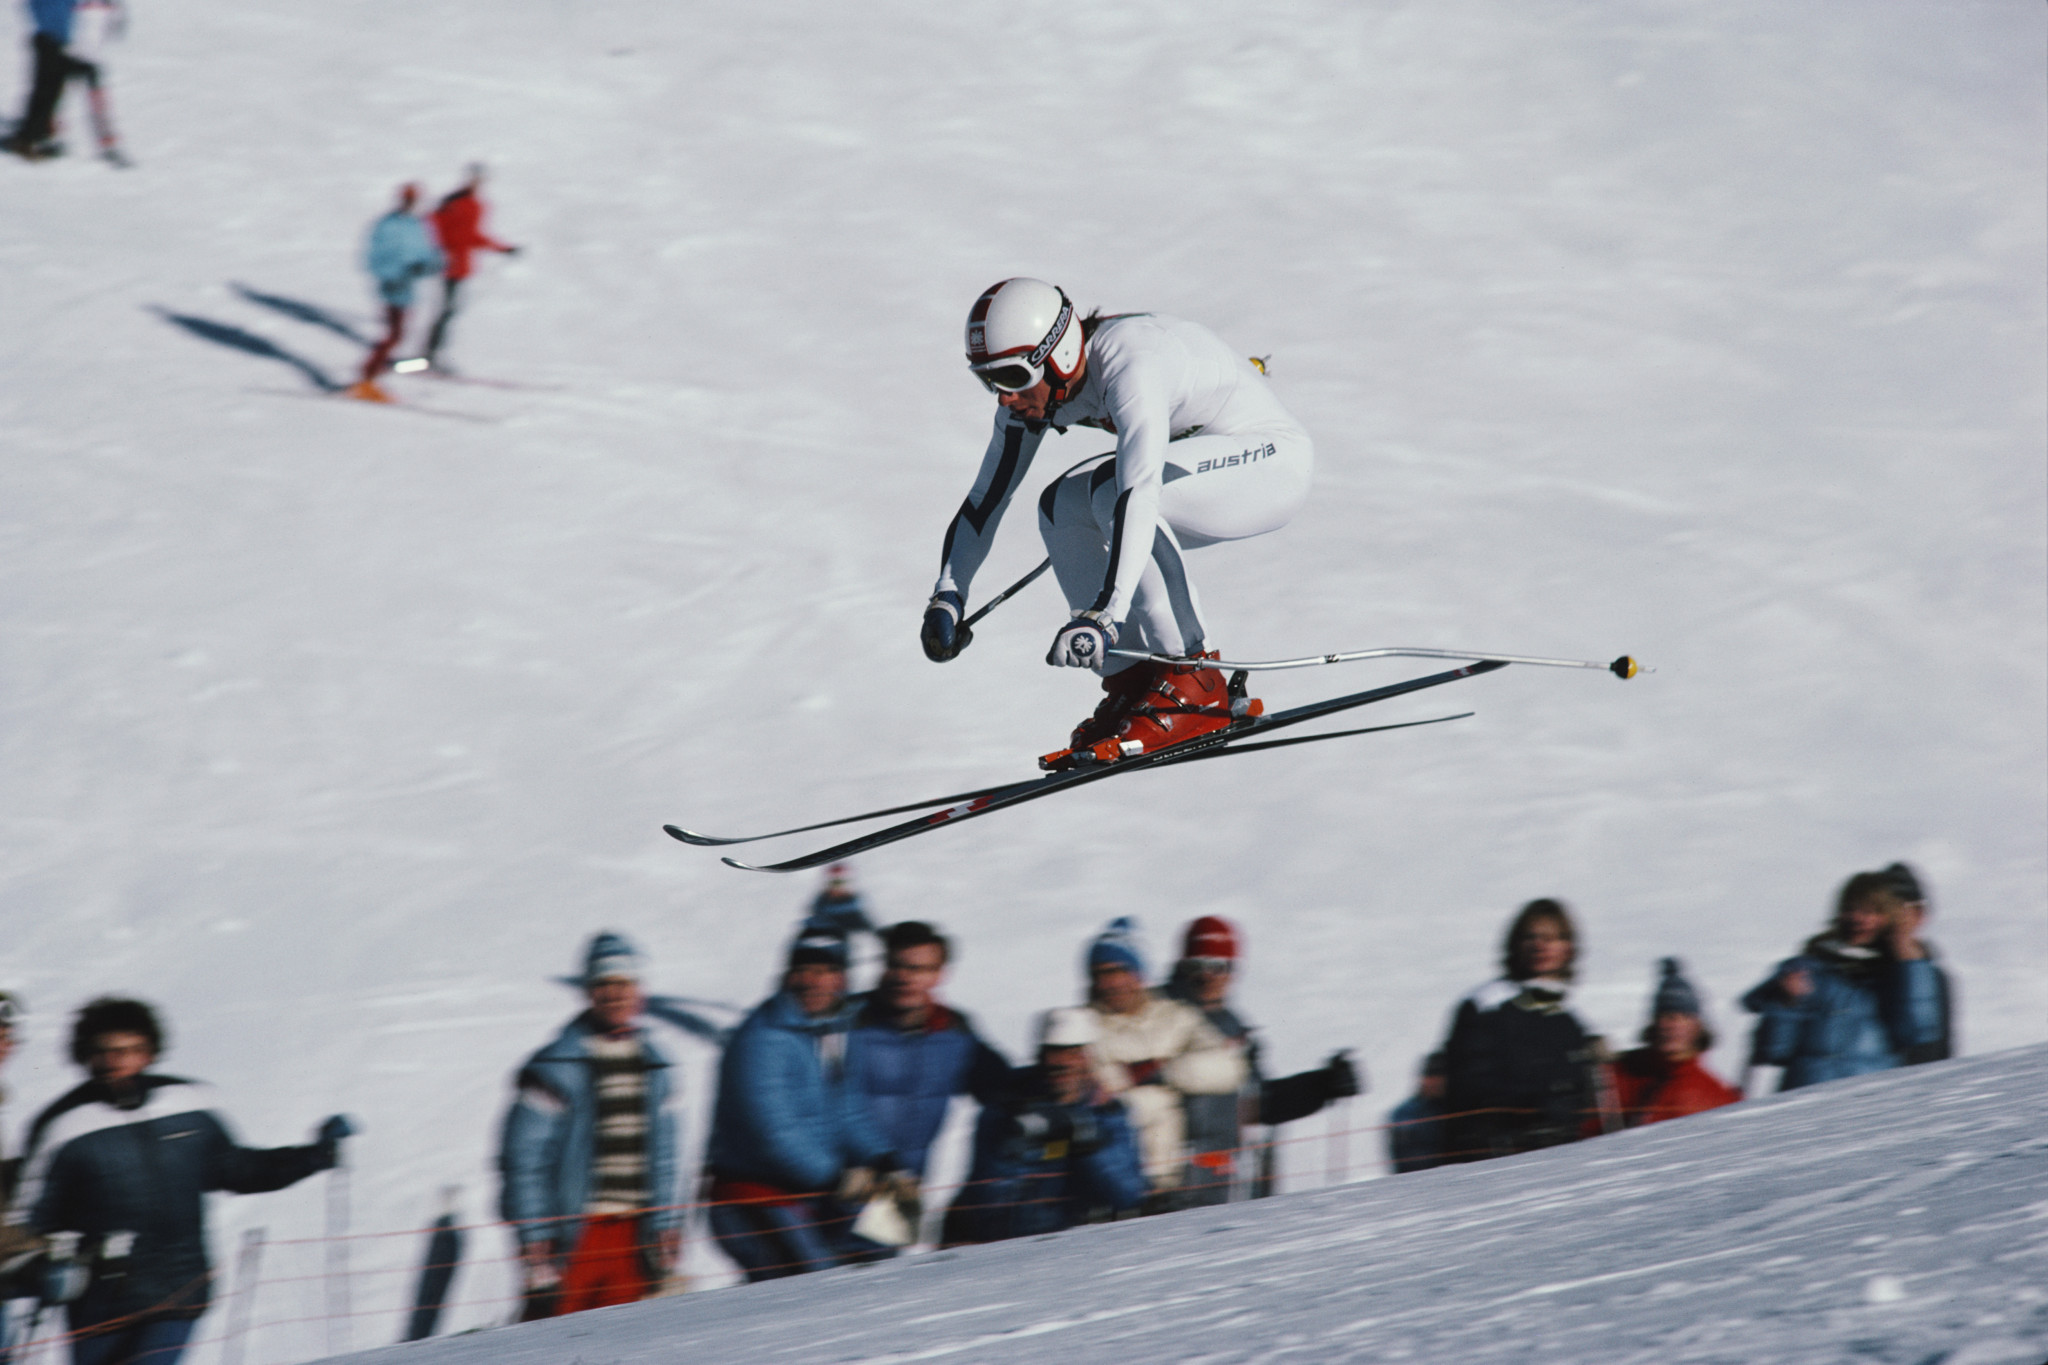 The 2023 Alpine Skiing World Championship started on February 6 in Courchevel Méribel, France ©Getty Images